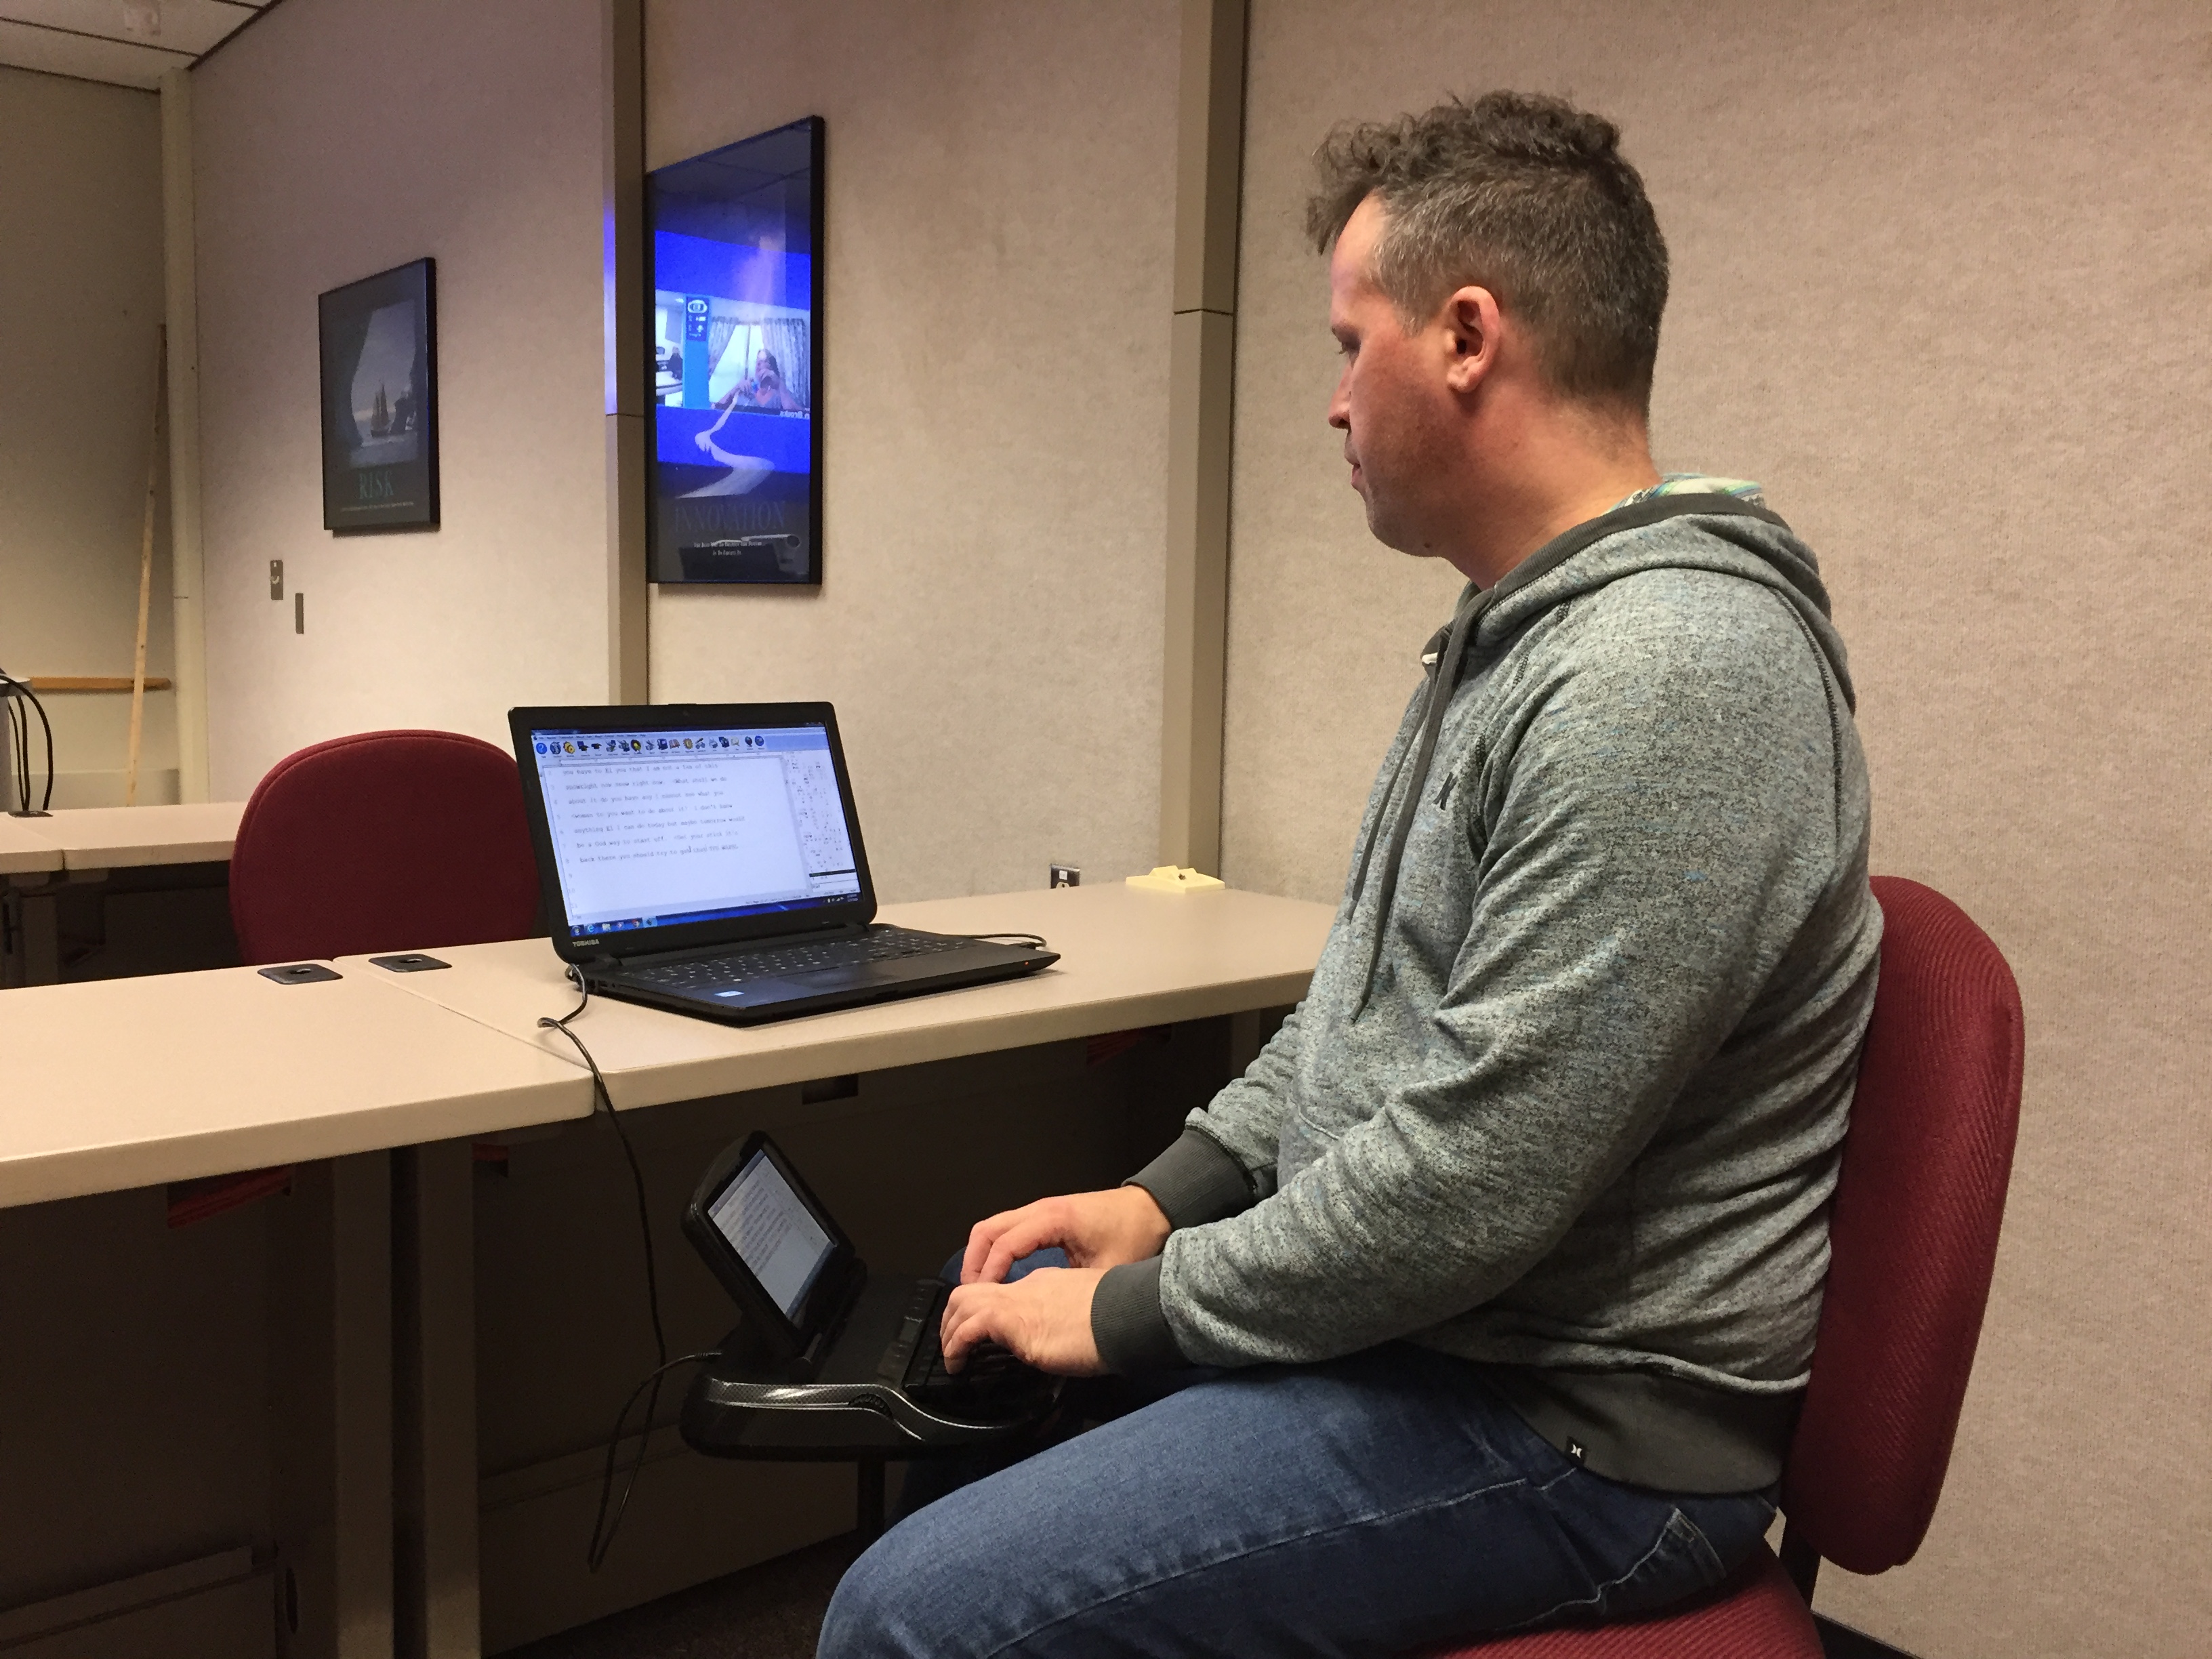 A former LTC student works at developing his court reporting skills.